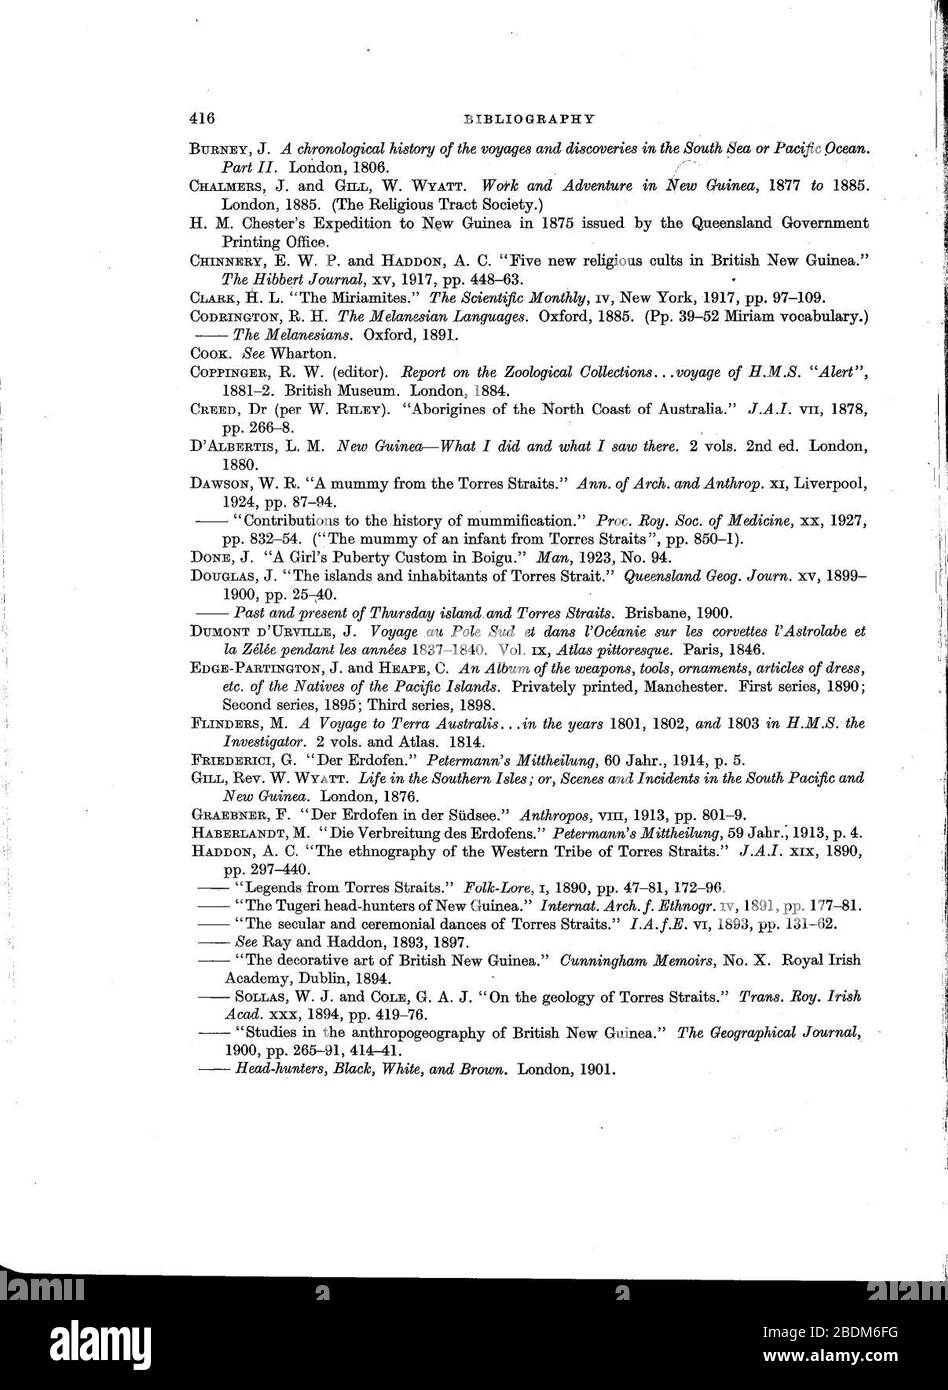 Haddon-Reports of the Cambridge Anthropological Expedition to Torres Straits-Vol 1 General Ethnography-ttu stc001 000031 Seite 436 Bild 0001. Stock Photo